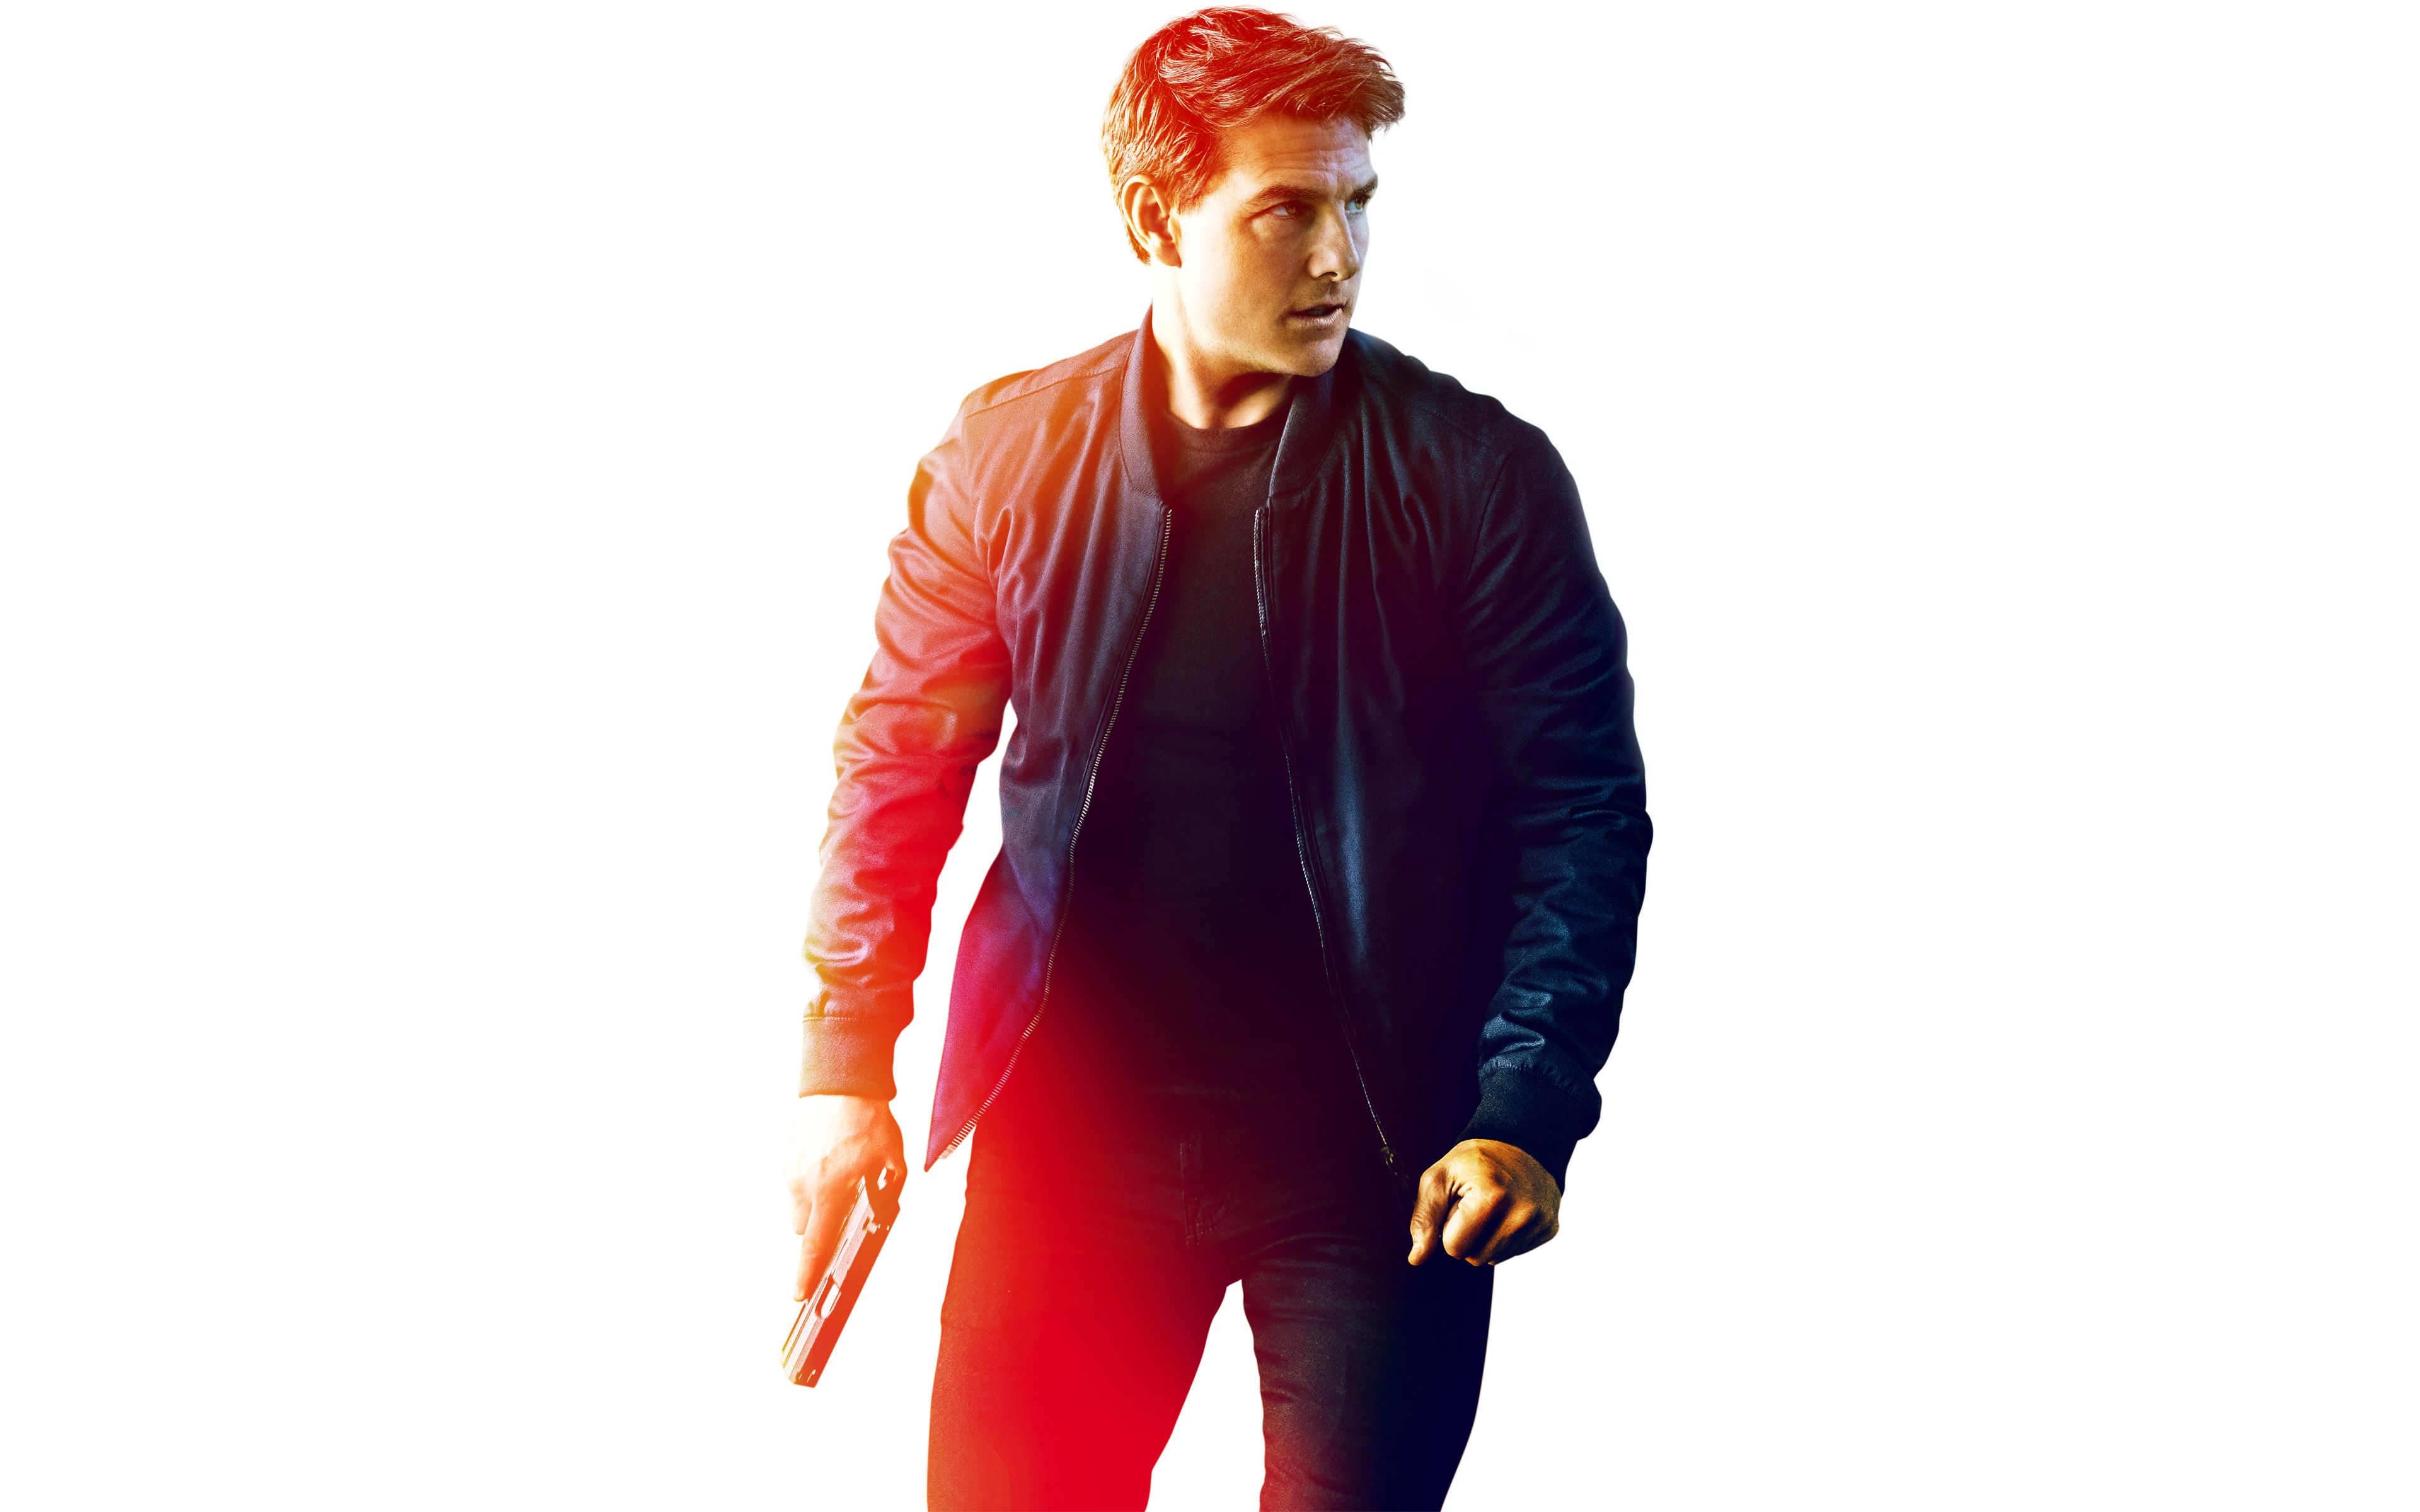 Tom Cruise in Mission. Wallpaper